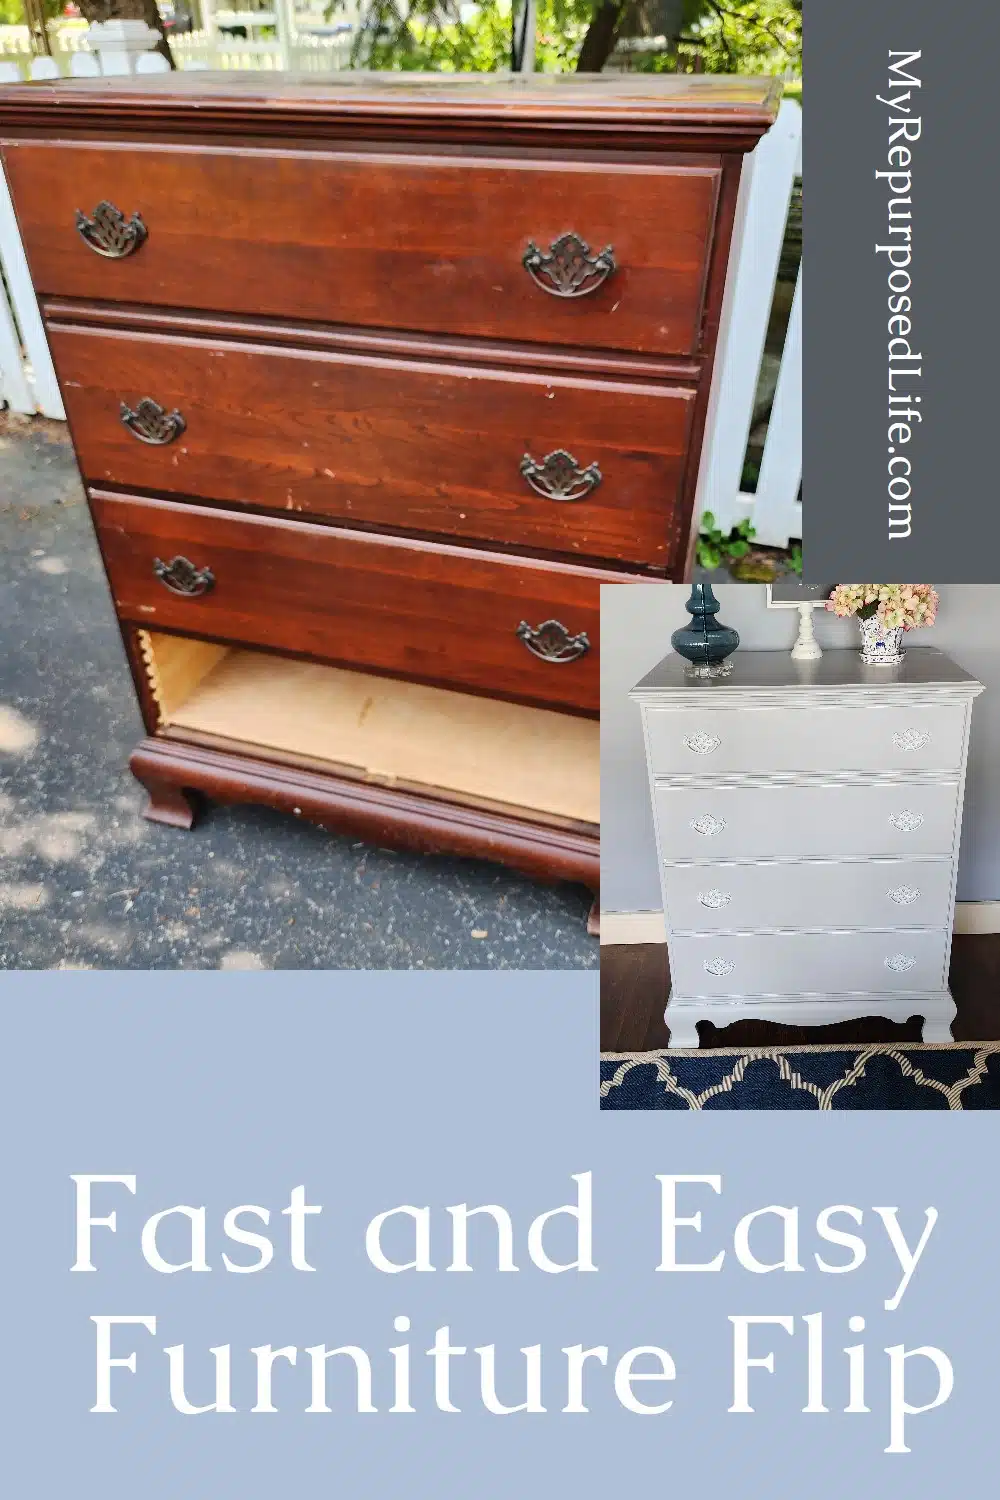 A beat up chest of drawers gets a new look with paint, repairs and a little TLC. via @repurposedlife